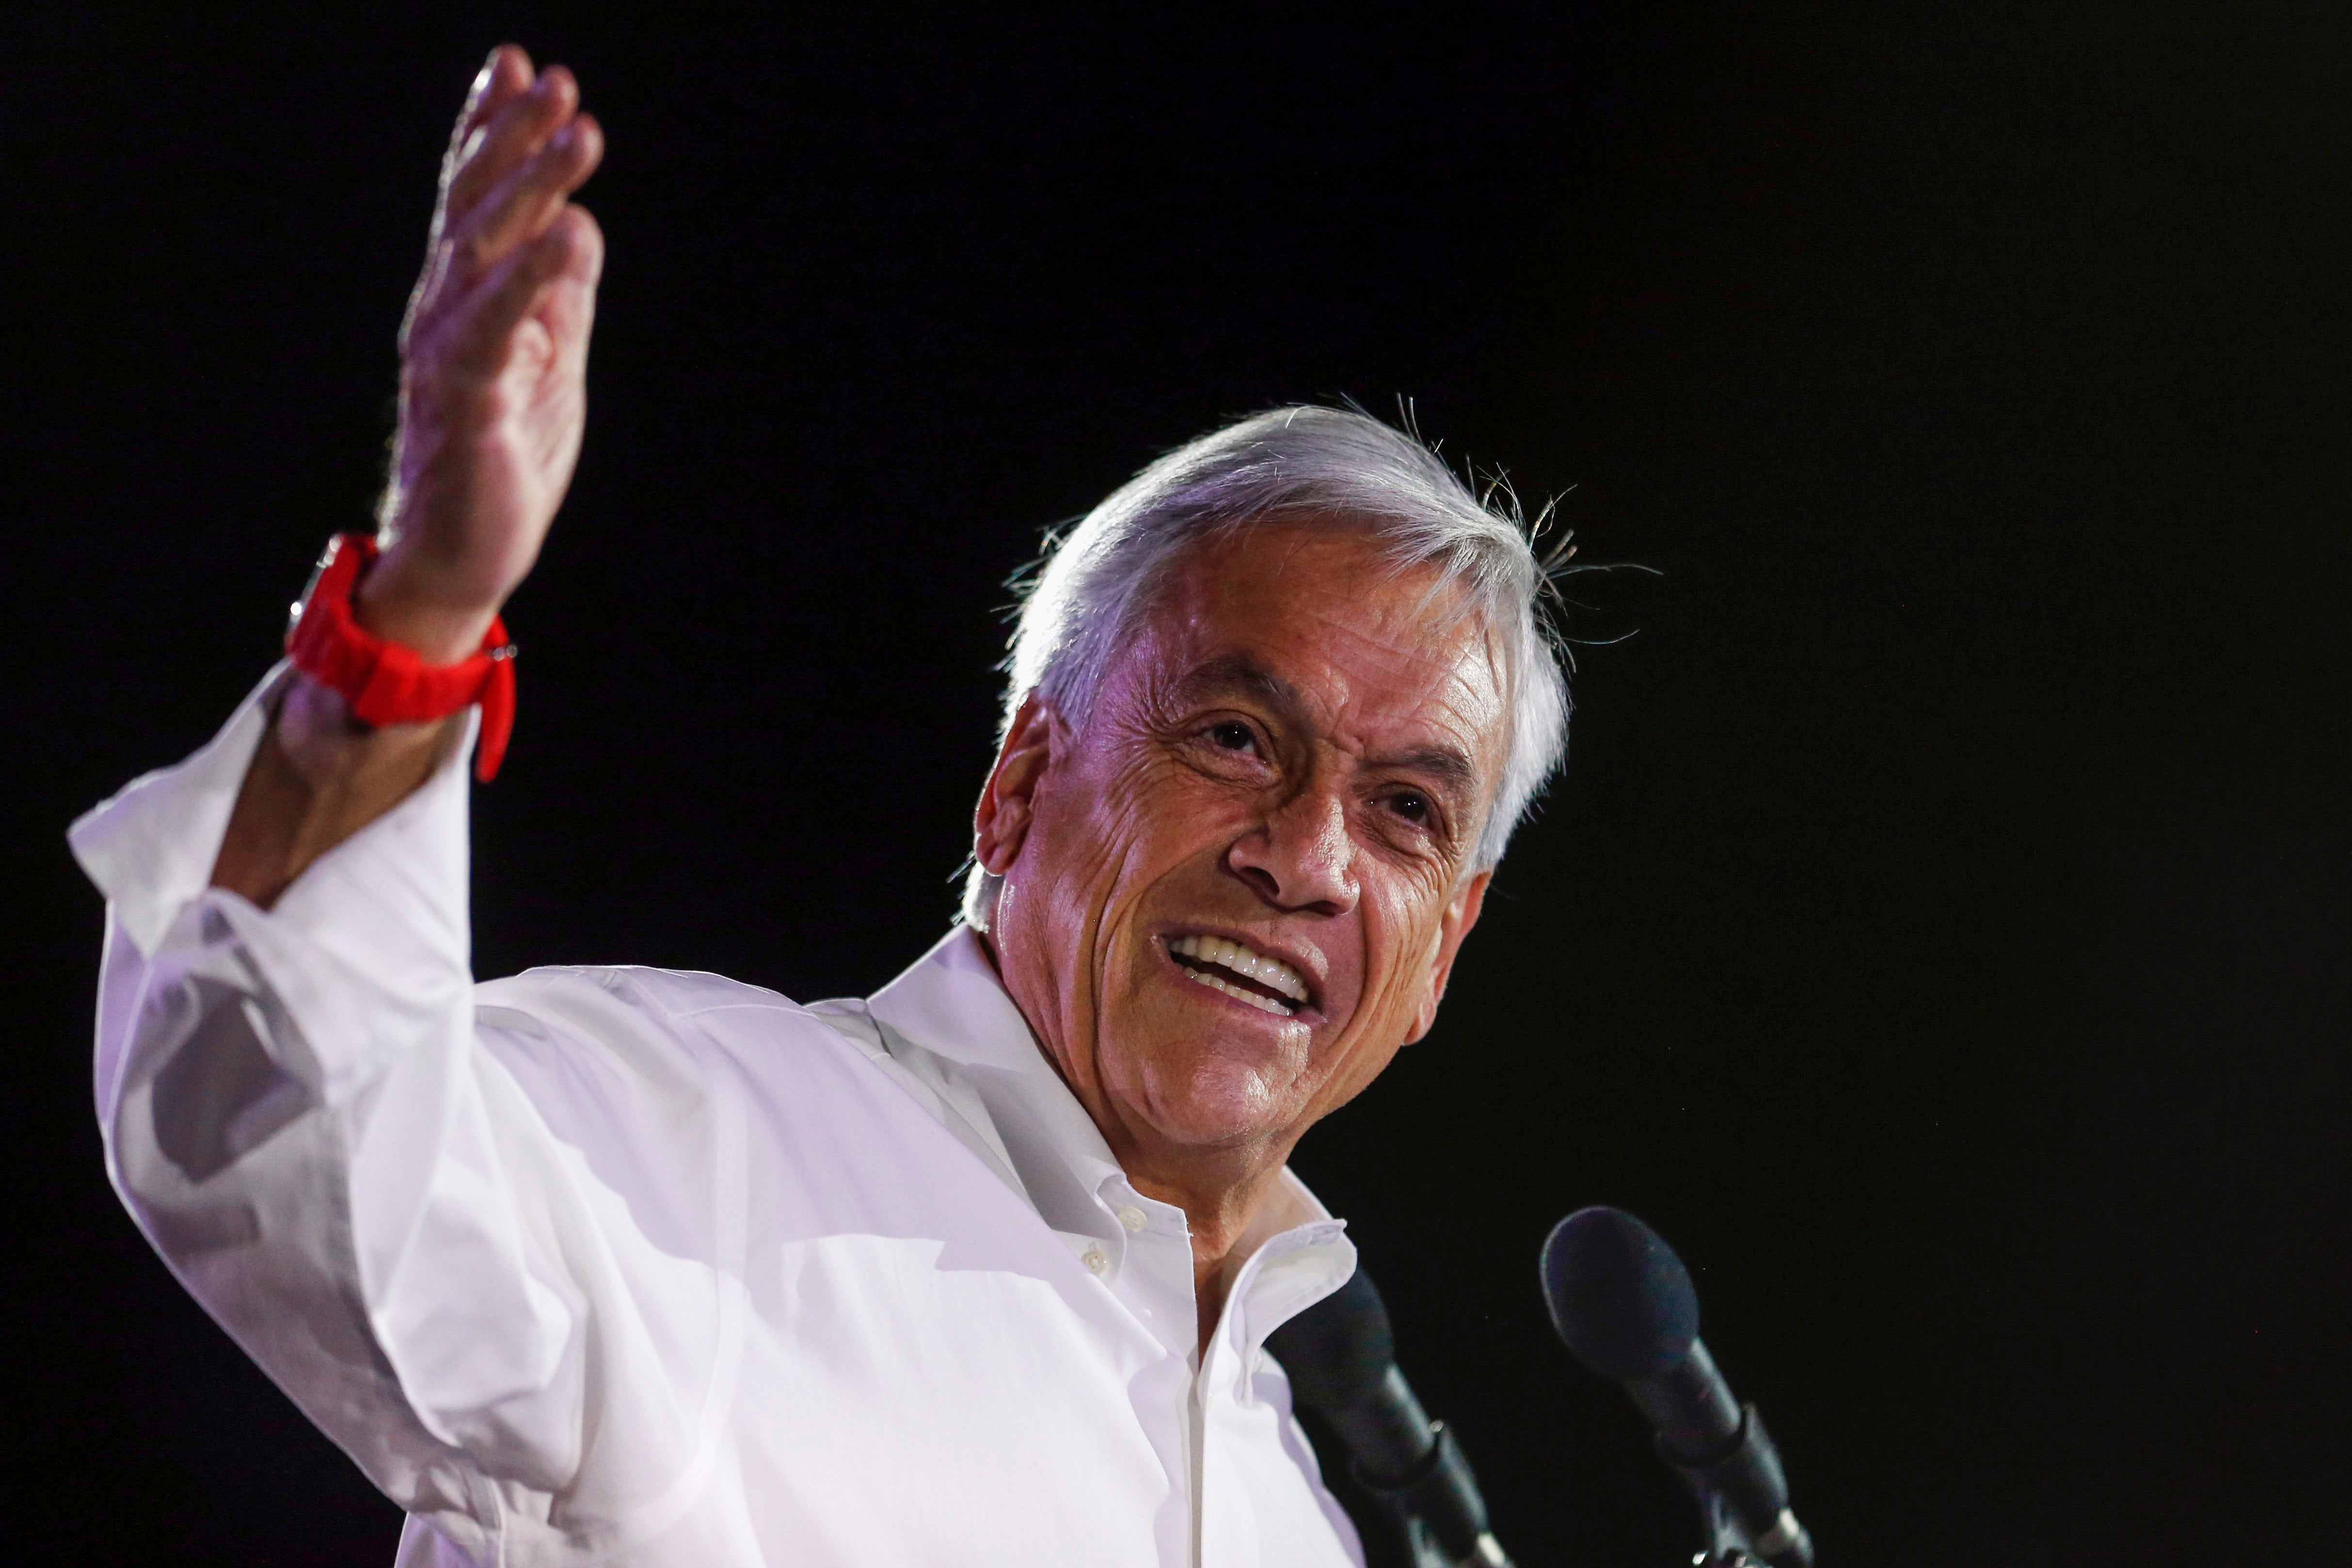 Sebastian Piñera addresses supporters at his closing campaign rally in Santiago in November 2017